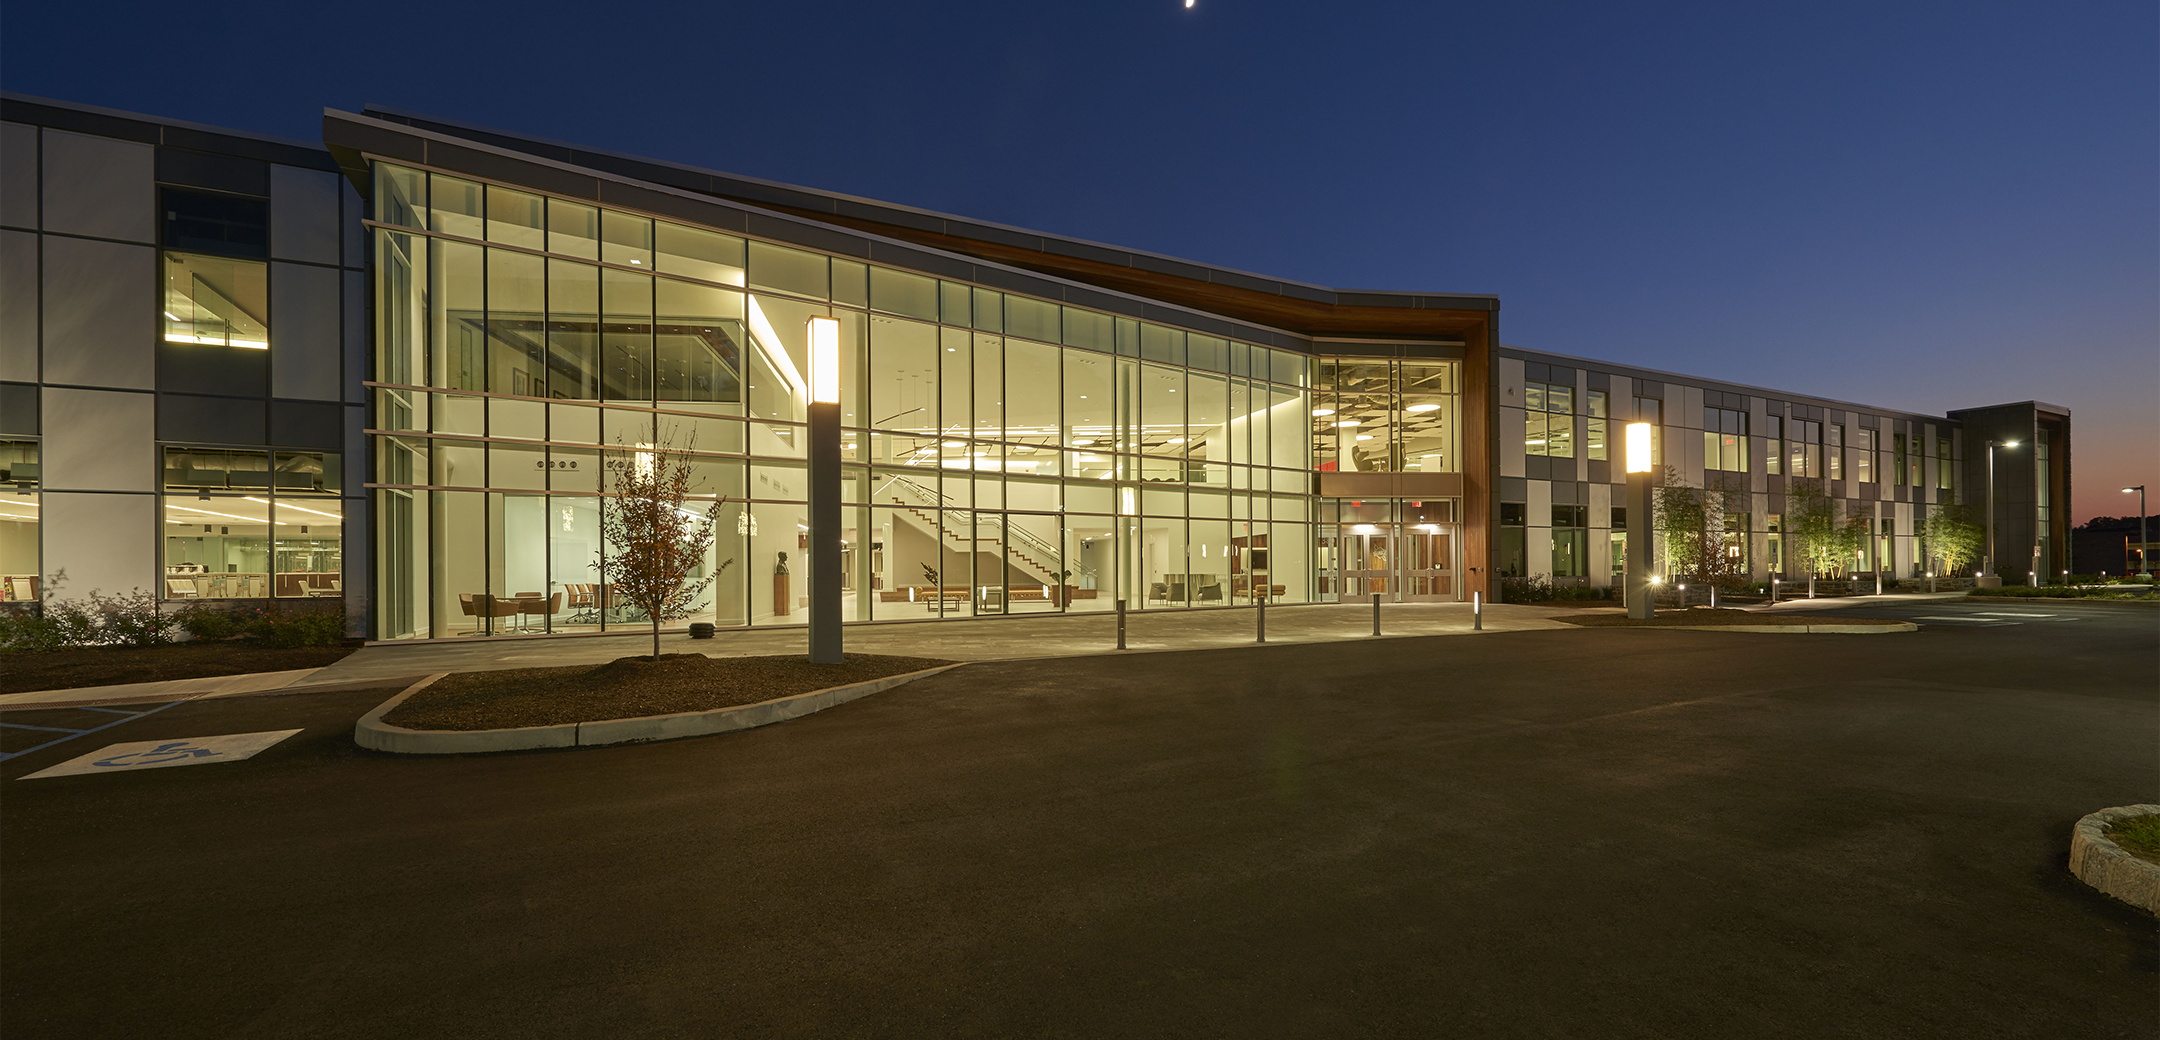 A nighttime exterior photo of Sunoco headquarters showcasing the interior light illuminating the front parking lot.